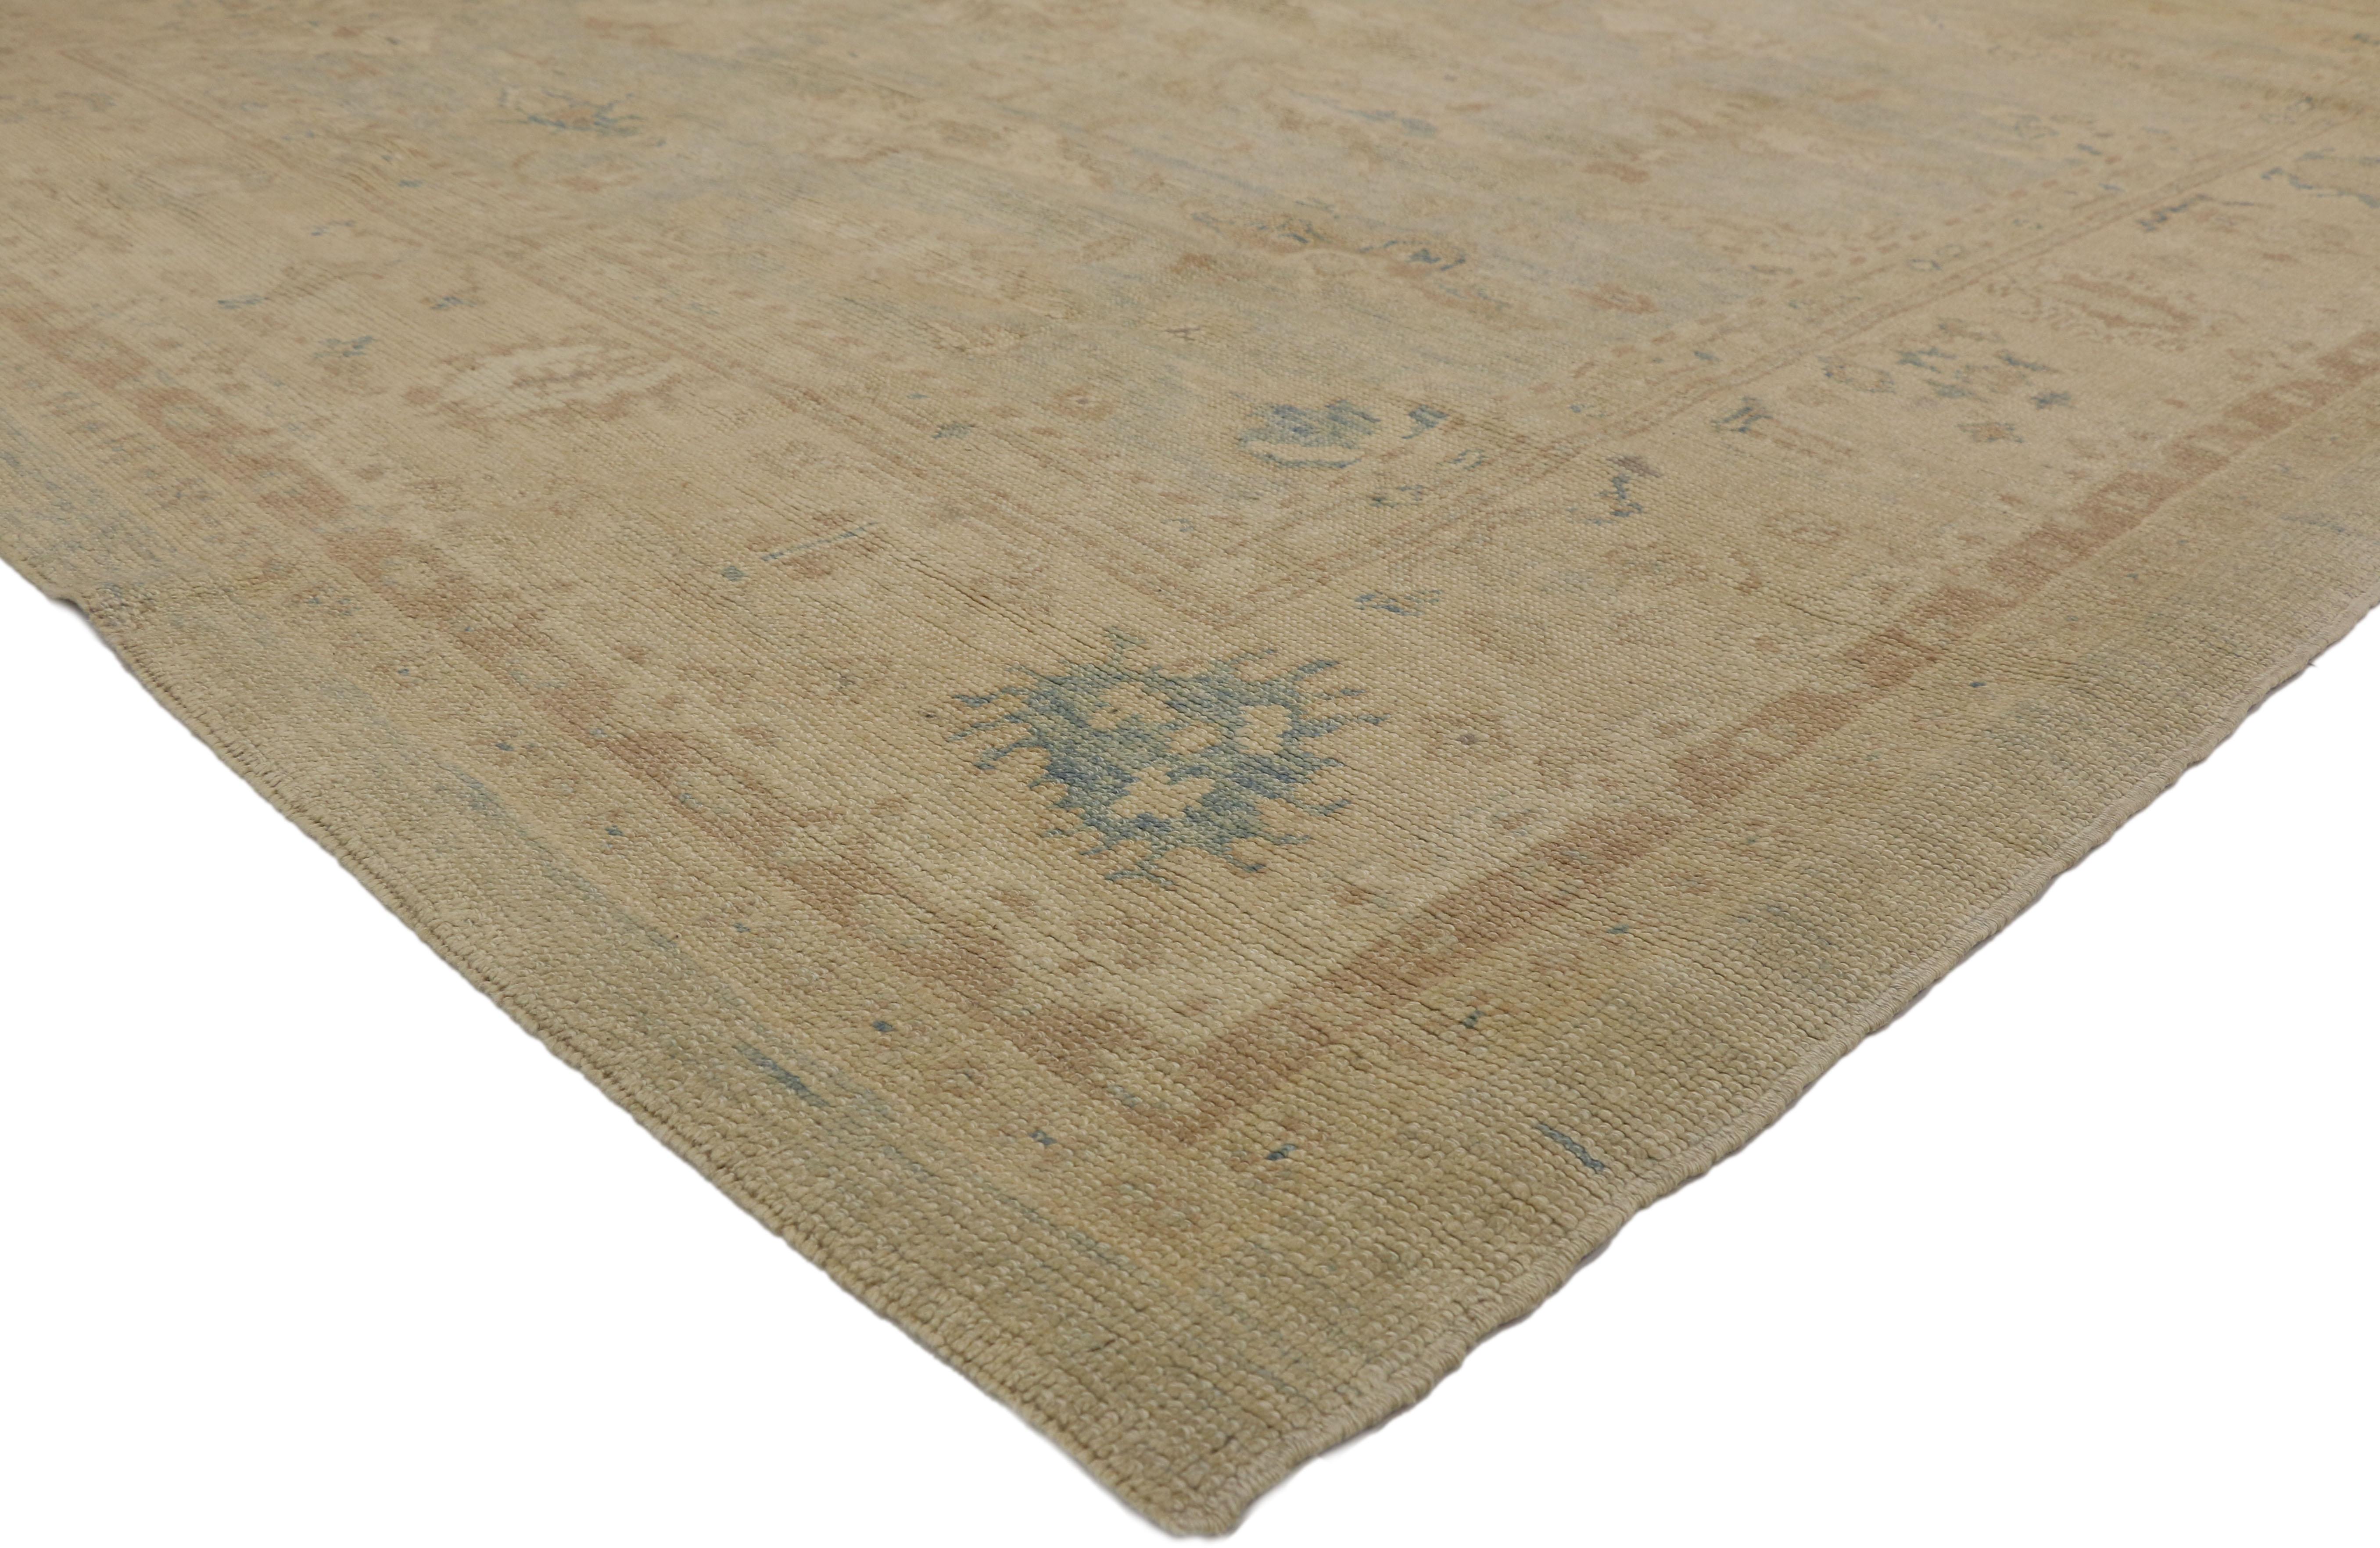 50496 New Contemporary Turkish Oushak rug with Transitional style. This hand knotted wool contemporary Turkish Oushak area rug features an all-over geometric pattern composed of Harshang-style motifs, blooming palmettes, leafy tendrils, and organic